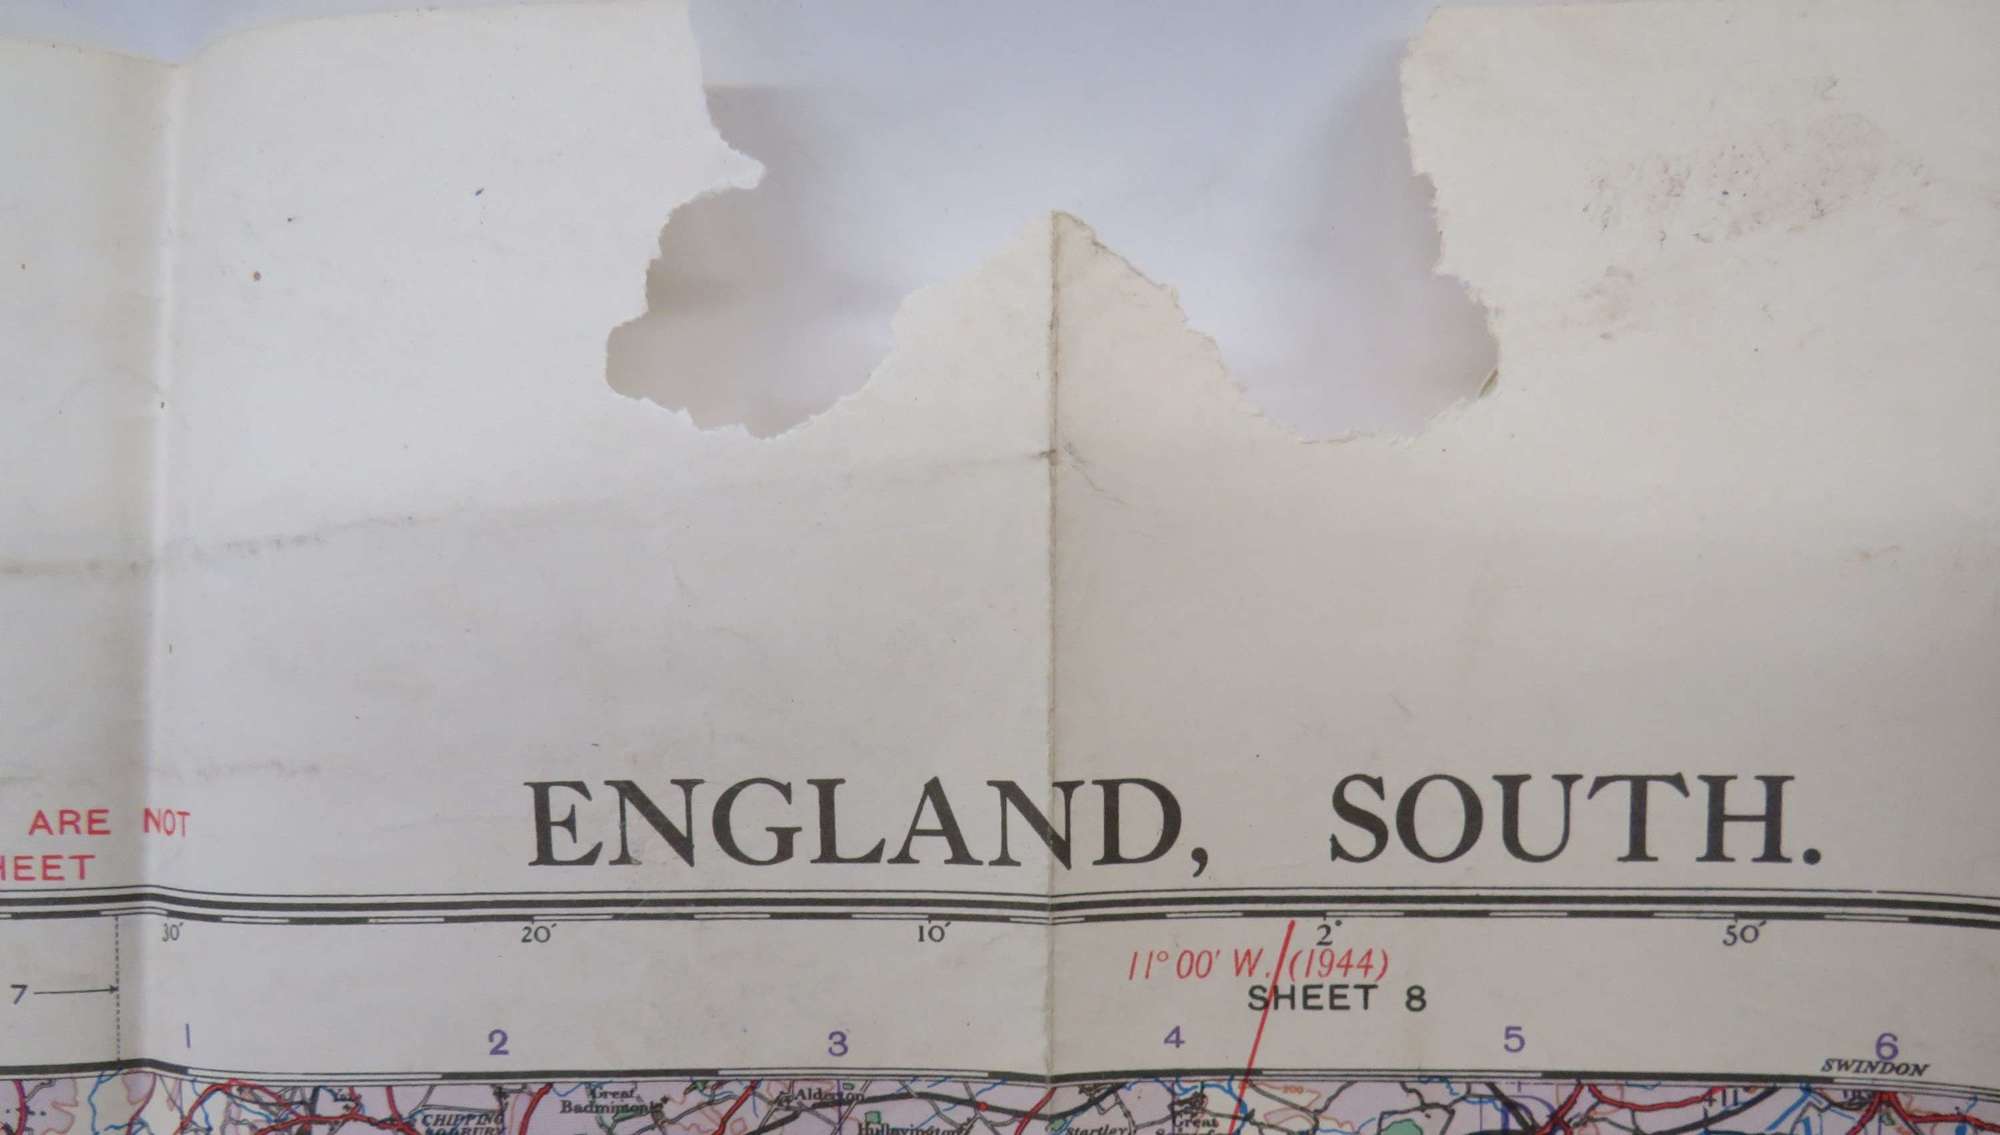 WW2 British Military Air Map of England South